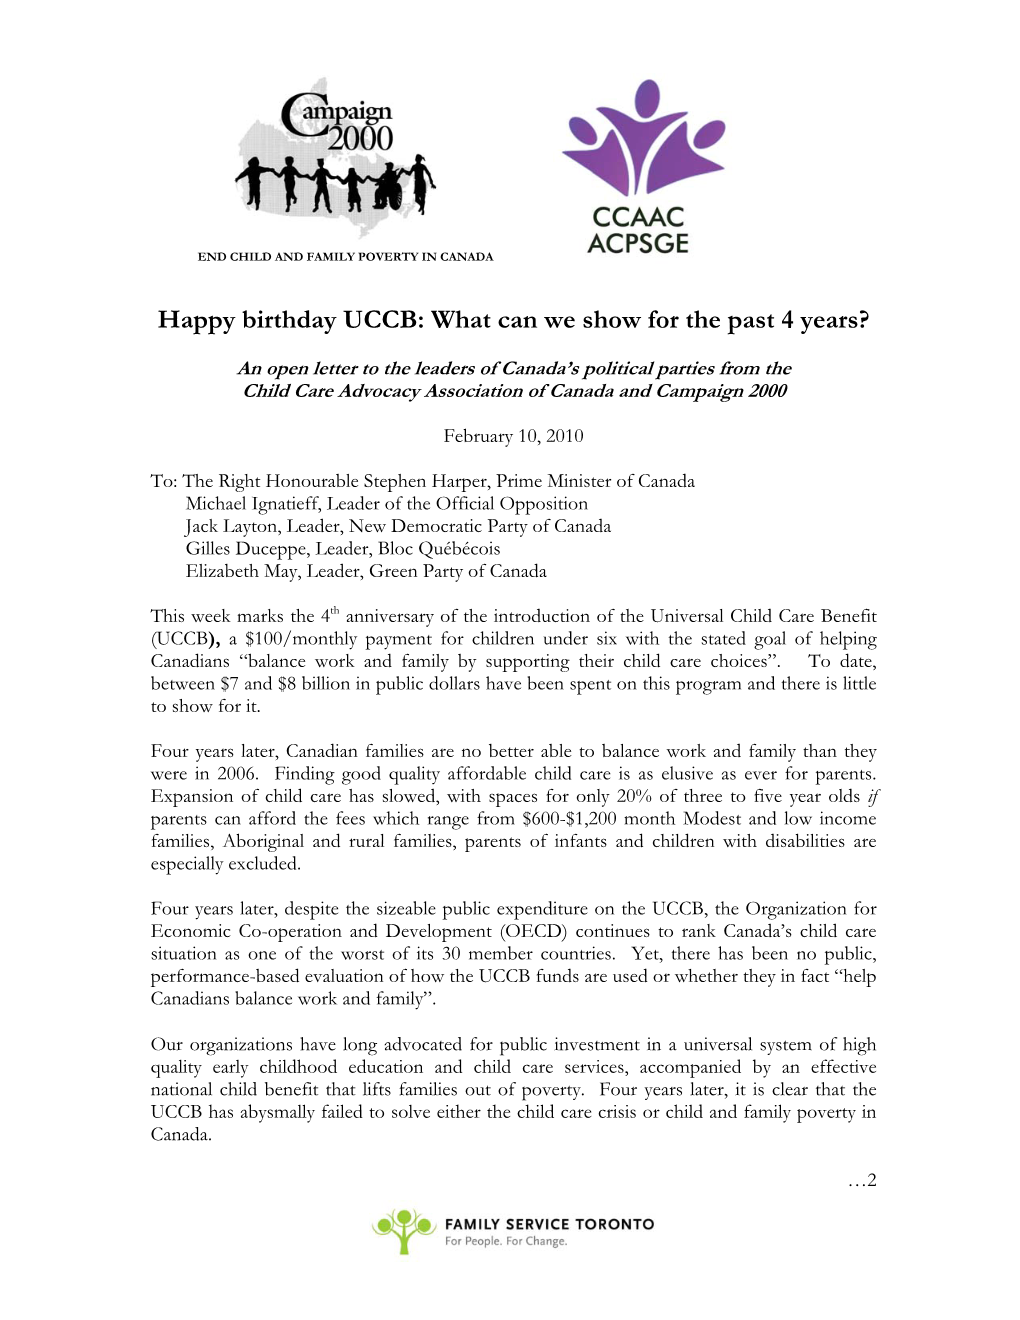 Happy Birthday UCCB: What Can We Show for the Past 4 Years?